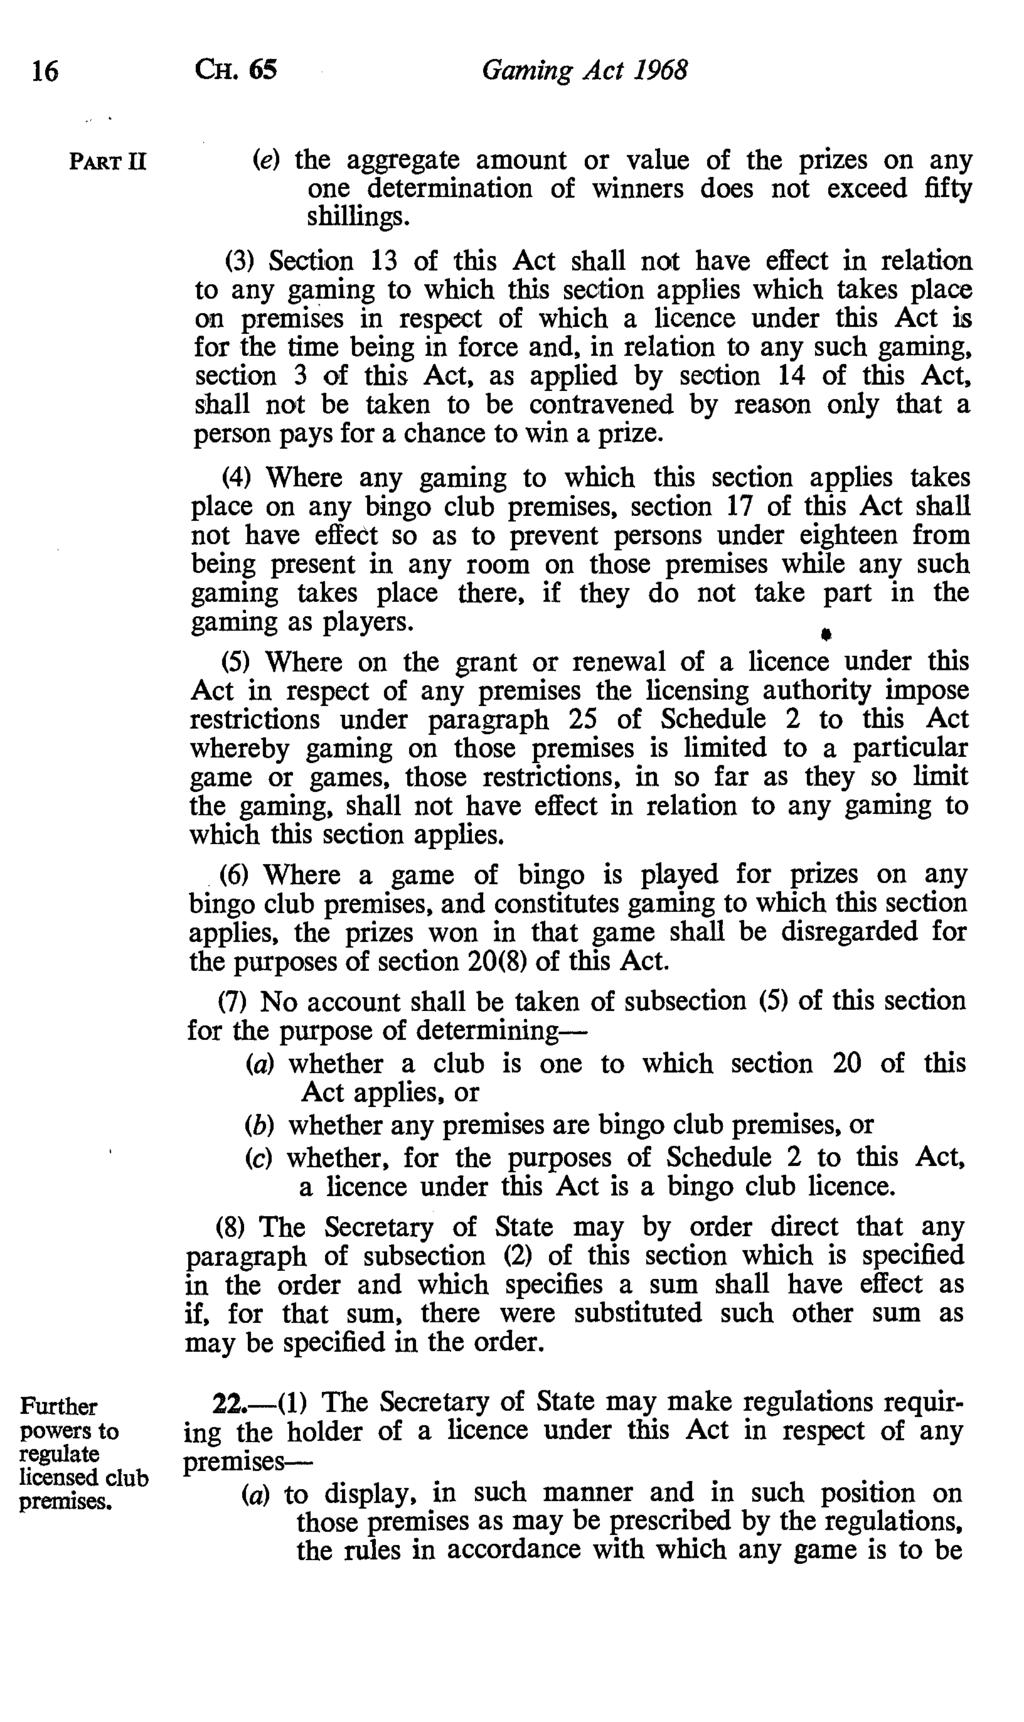 16 CH. 65 Gaming Act 1968 PART II Further powers to regulate licensed club premises.